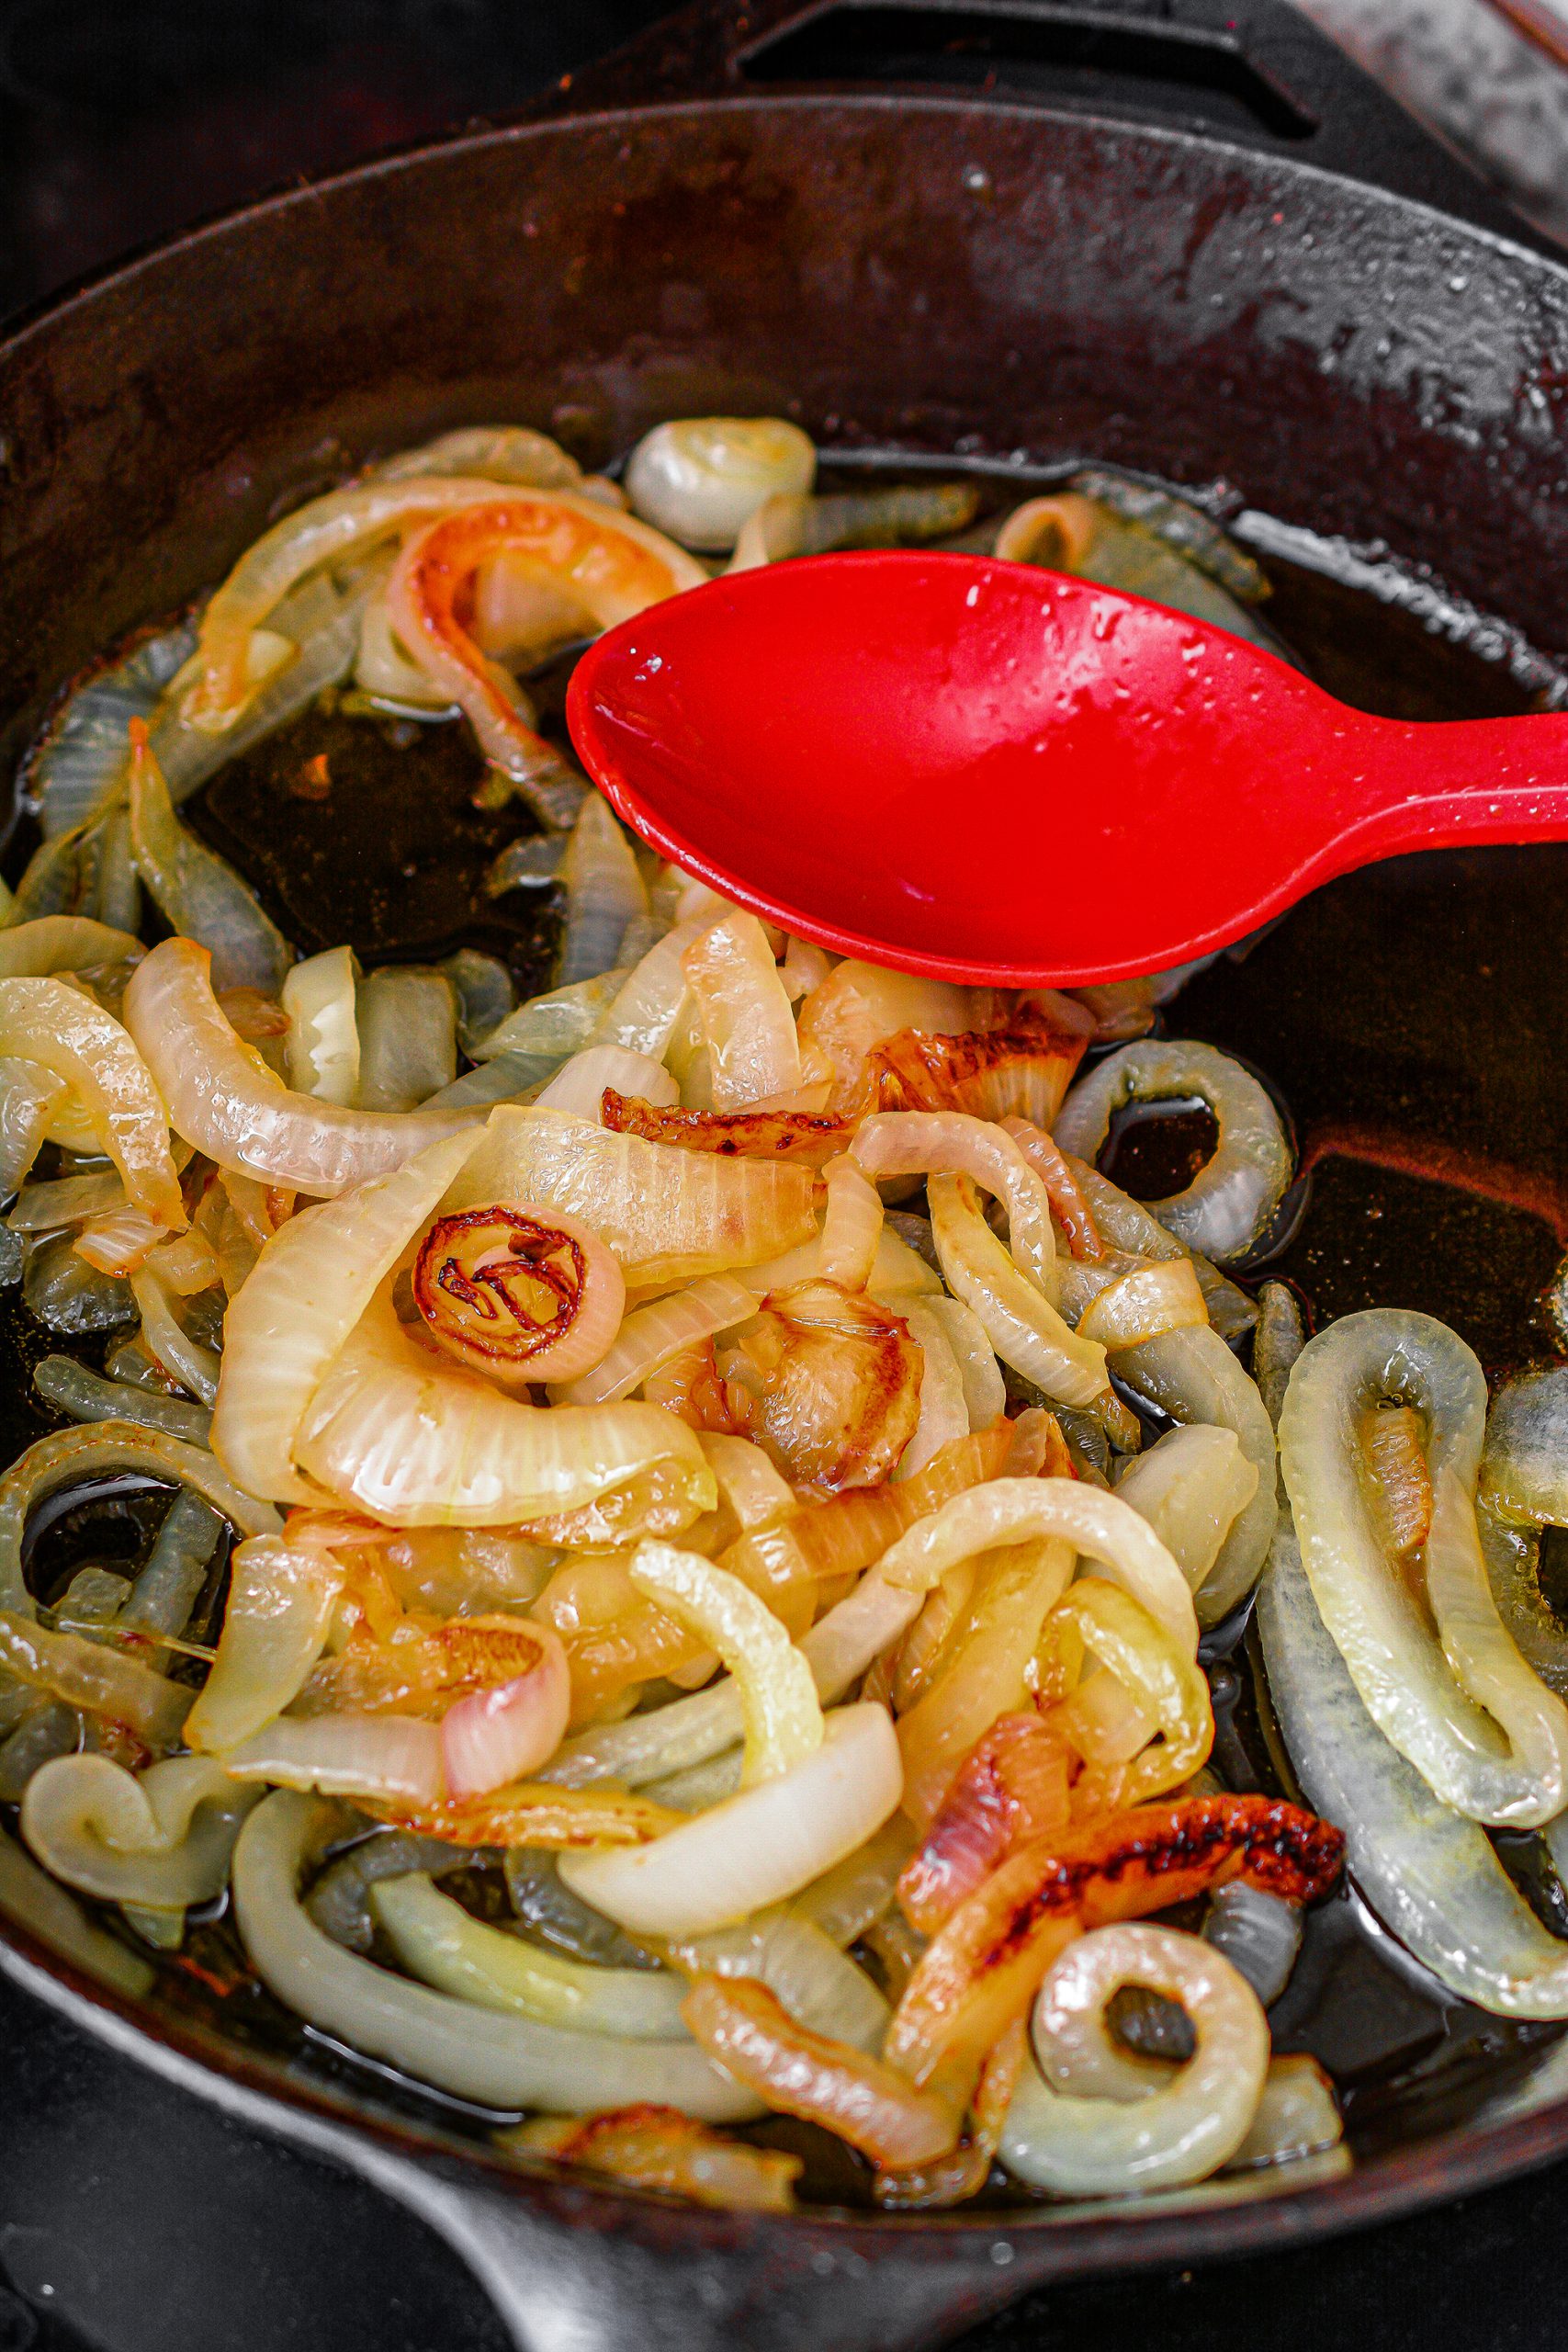 Add the olive oil to an ovenproof skillet over medium heat on the stove, and saute the onions in it until they are caramelized, about 15 minutes.